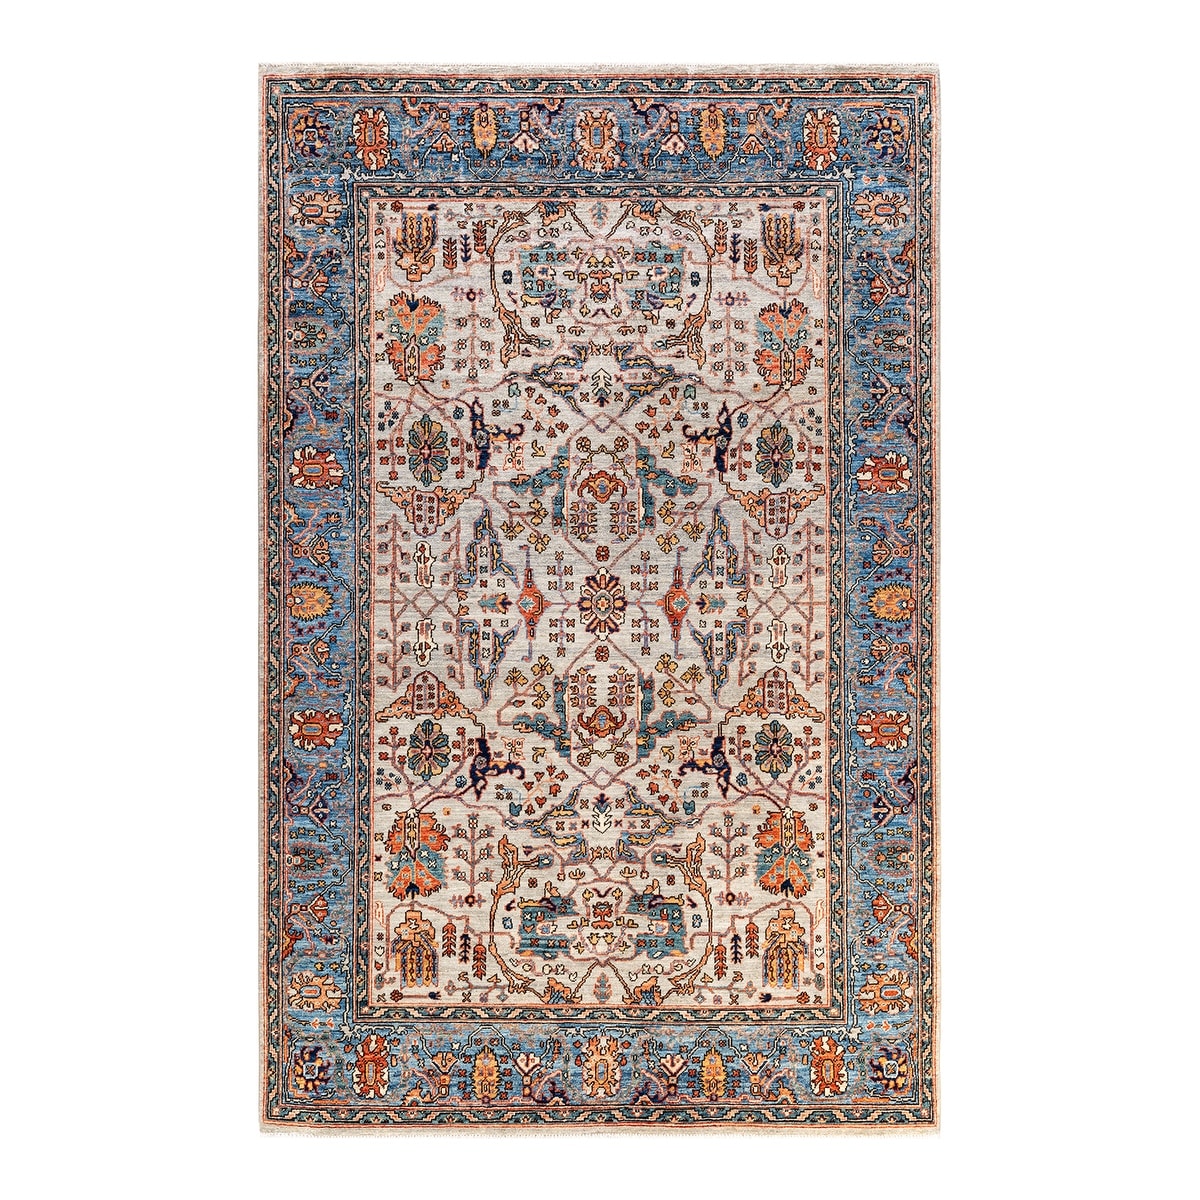 https://ak1.ostkcdn.com/images/products/is/images/direct/c3d64f2bd0fc359884d44c7382ab34998a4a2393/SERAPI%2C-Hand-Knotted-Area-Rug---8%27-11%22-X-5%27-9%22.jpg